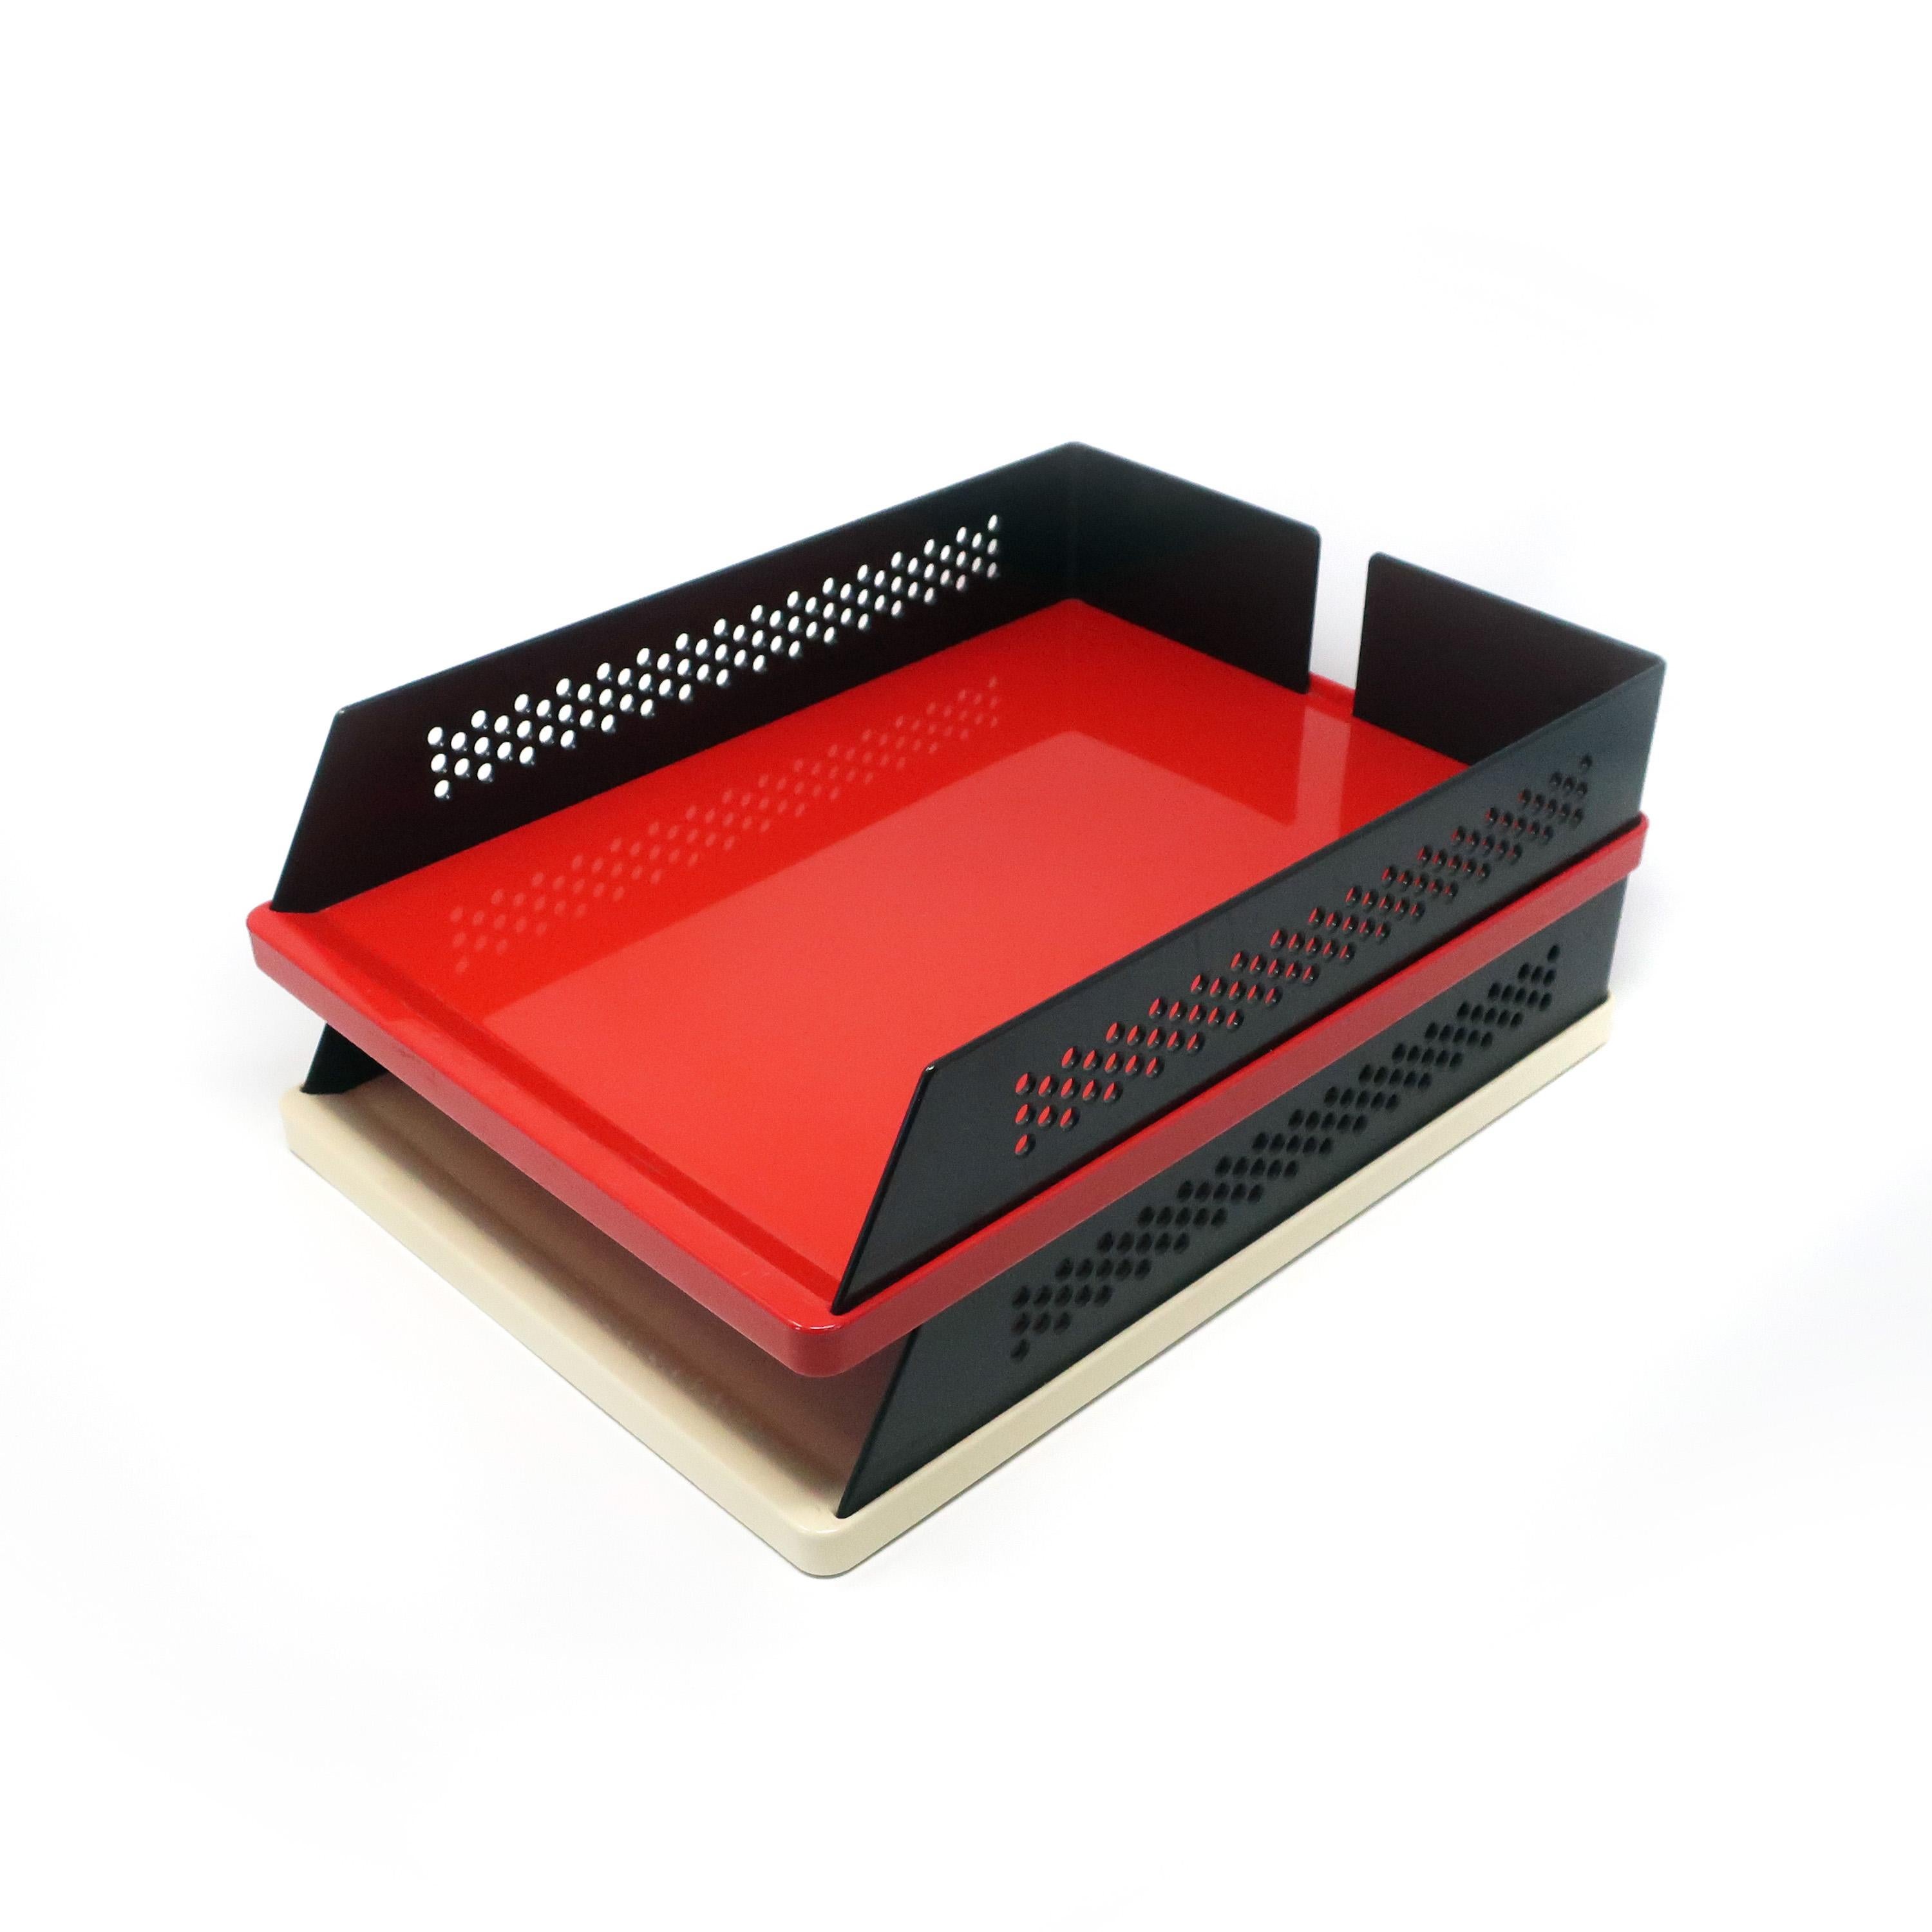 Italian Pair of Red & White Babele 940 Trays by Barbieri & Marianelli for Rexite